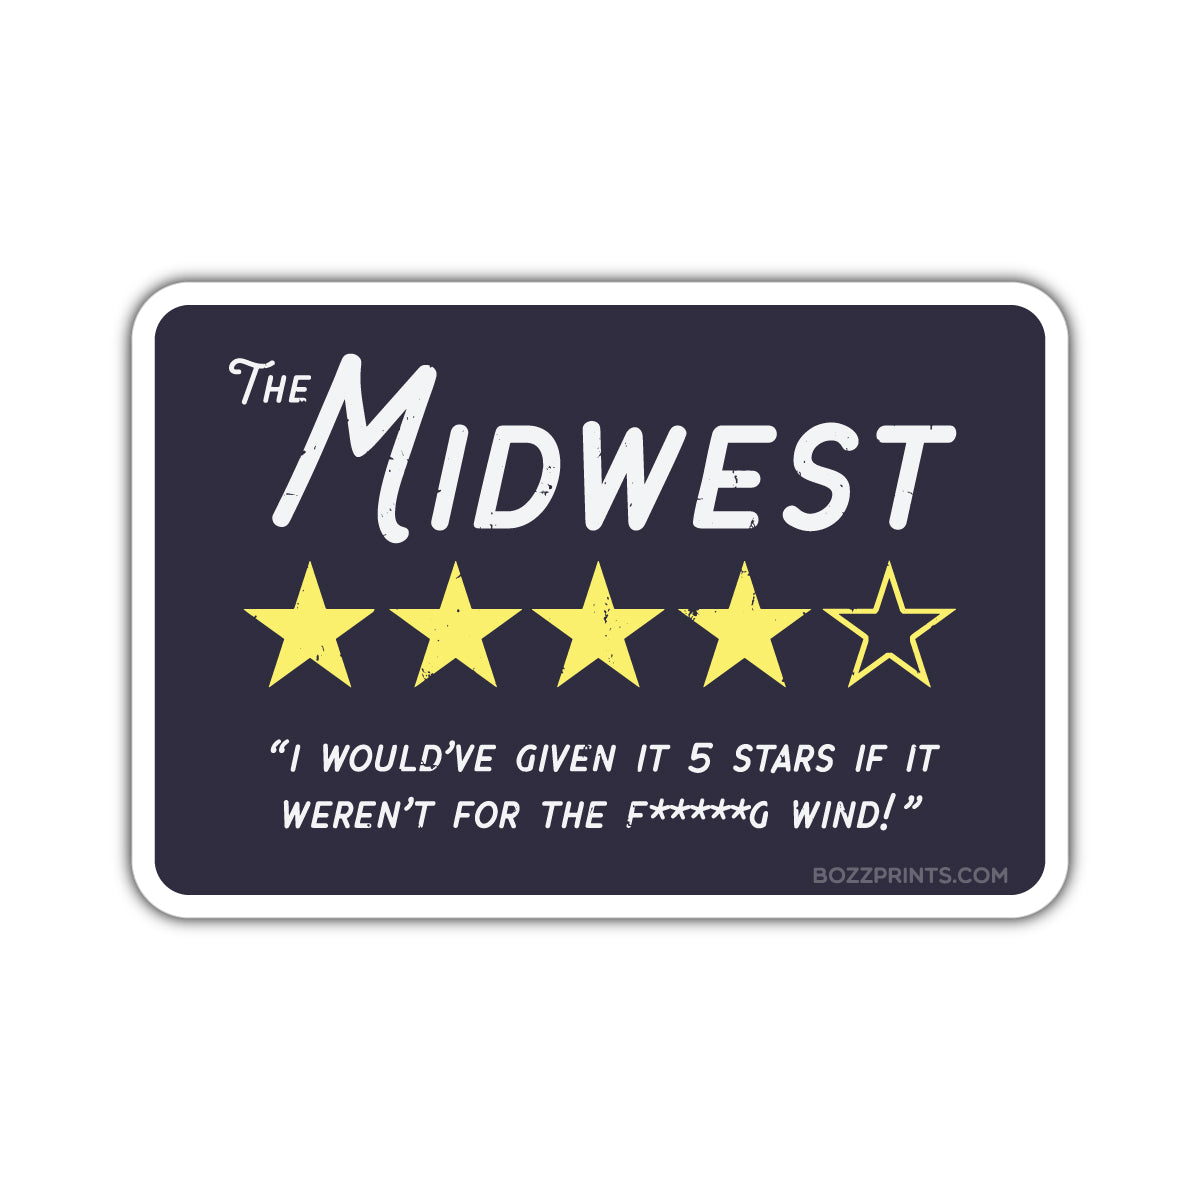 The Midwest Review